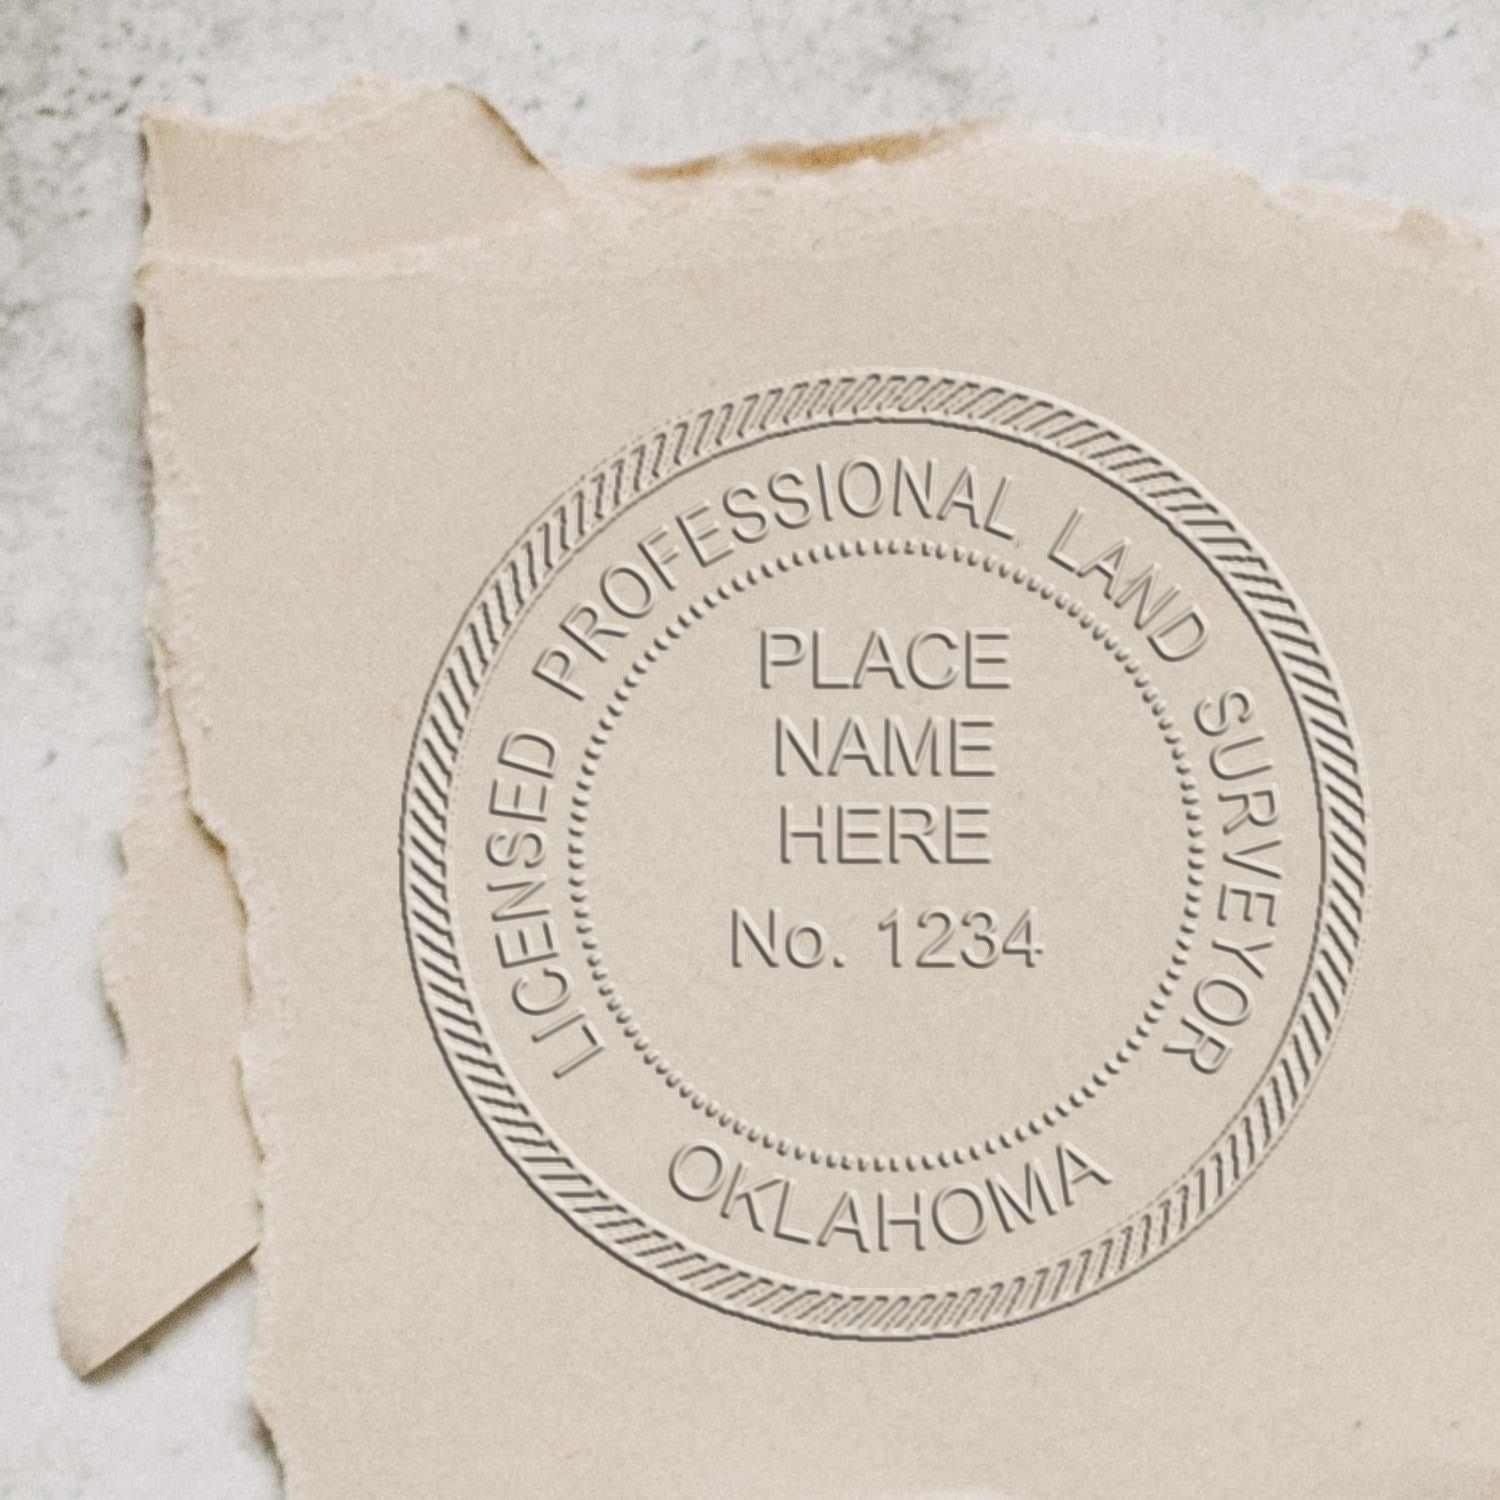 An in use photo of the Hybrid Oklahoma Land Surveyor Seal showing a sample imprint on a cardstock